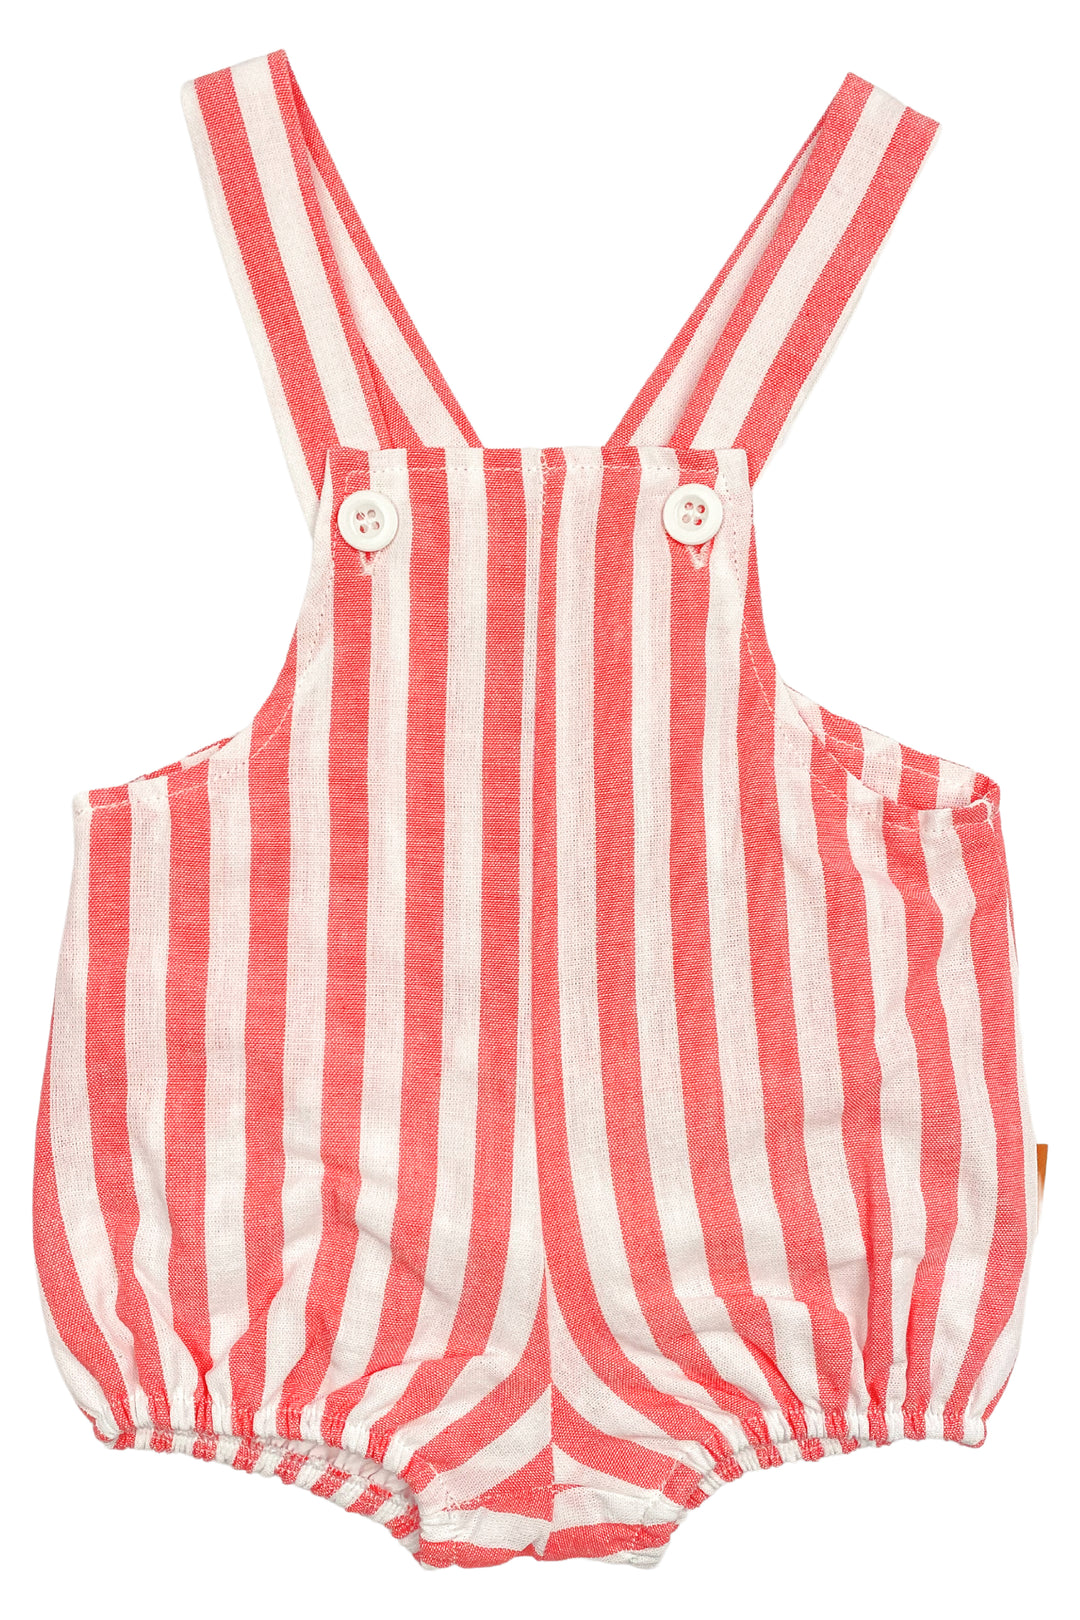 Cocote "Julian" Striped Dungaree Romper | Millie and John